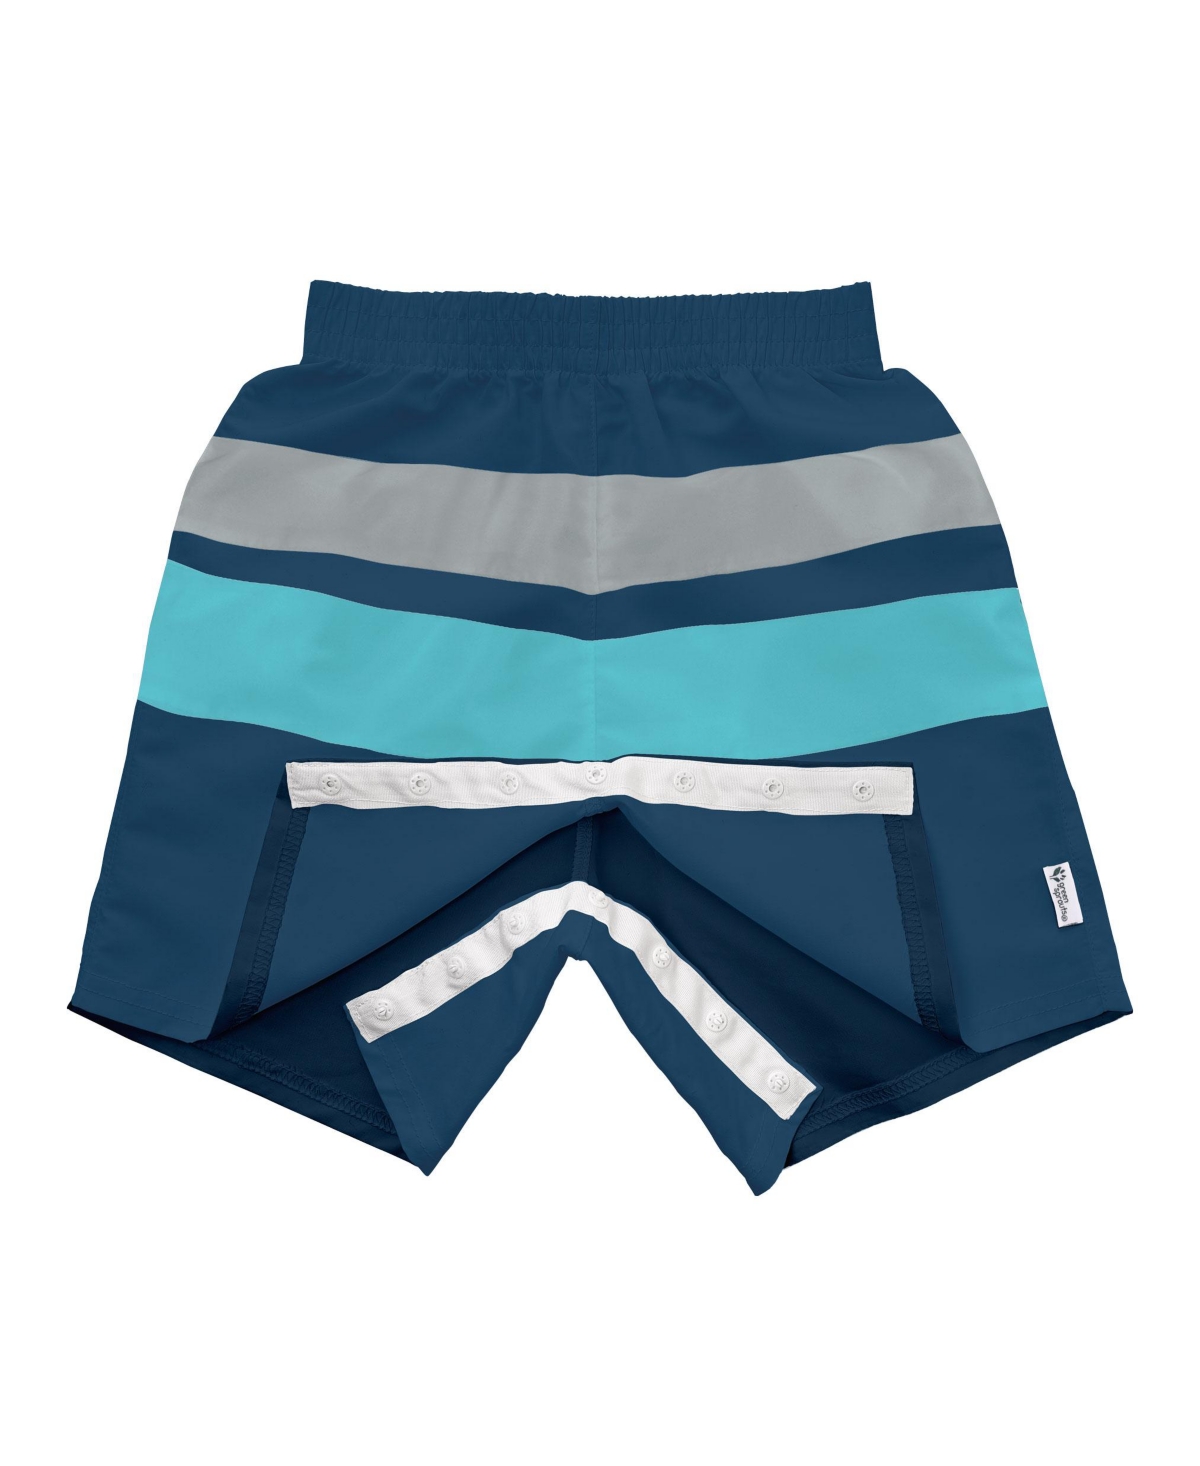 Green Sprouts Toddler Boys Lightweight Easy-change Swim Trunks In Navy Aqua Gray Colorblock